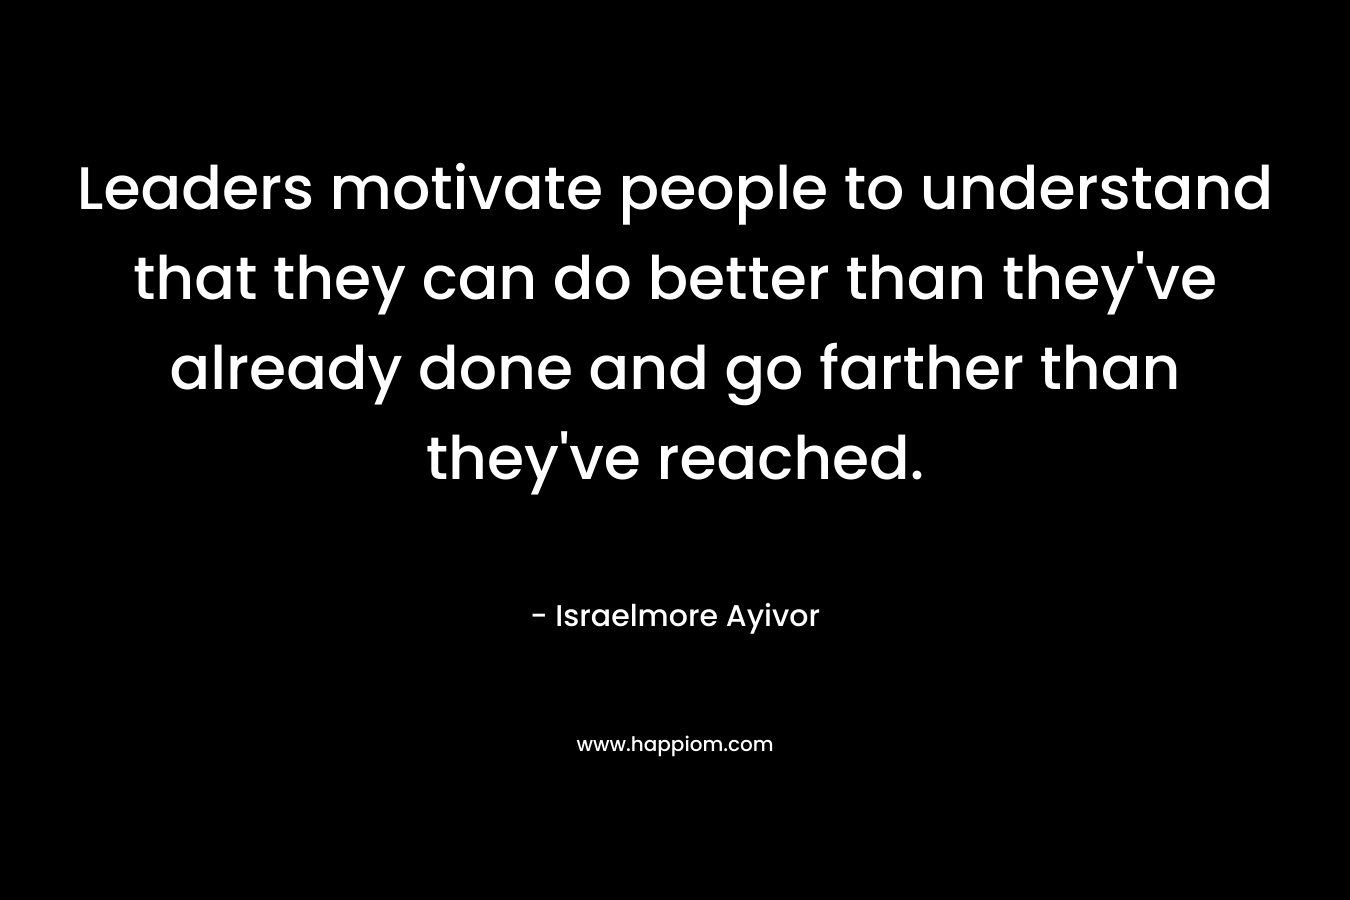 Leaders motivate people to understand that they can do better than they've already done and go farther than they've reached.